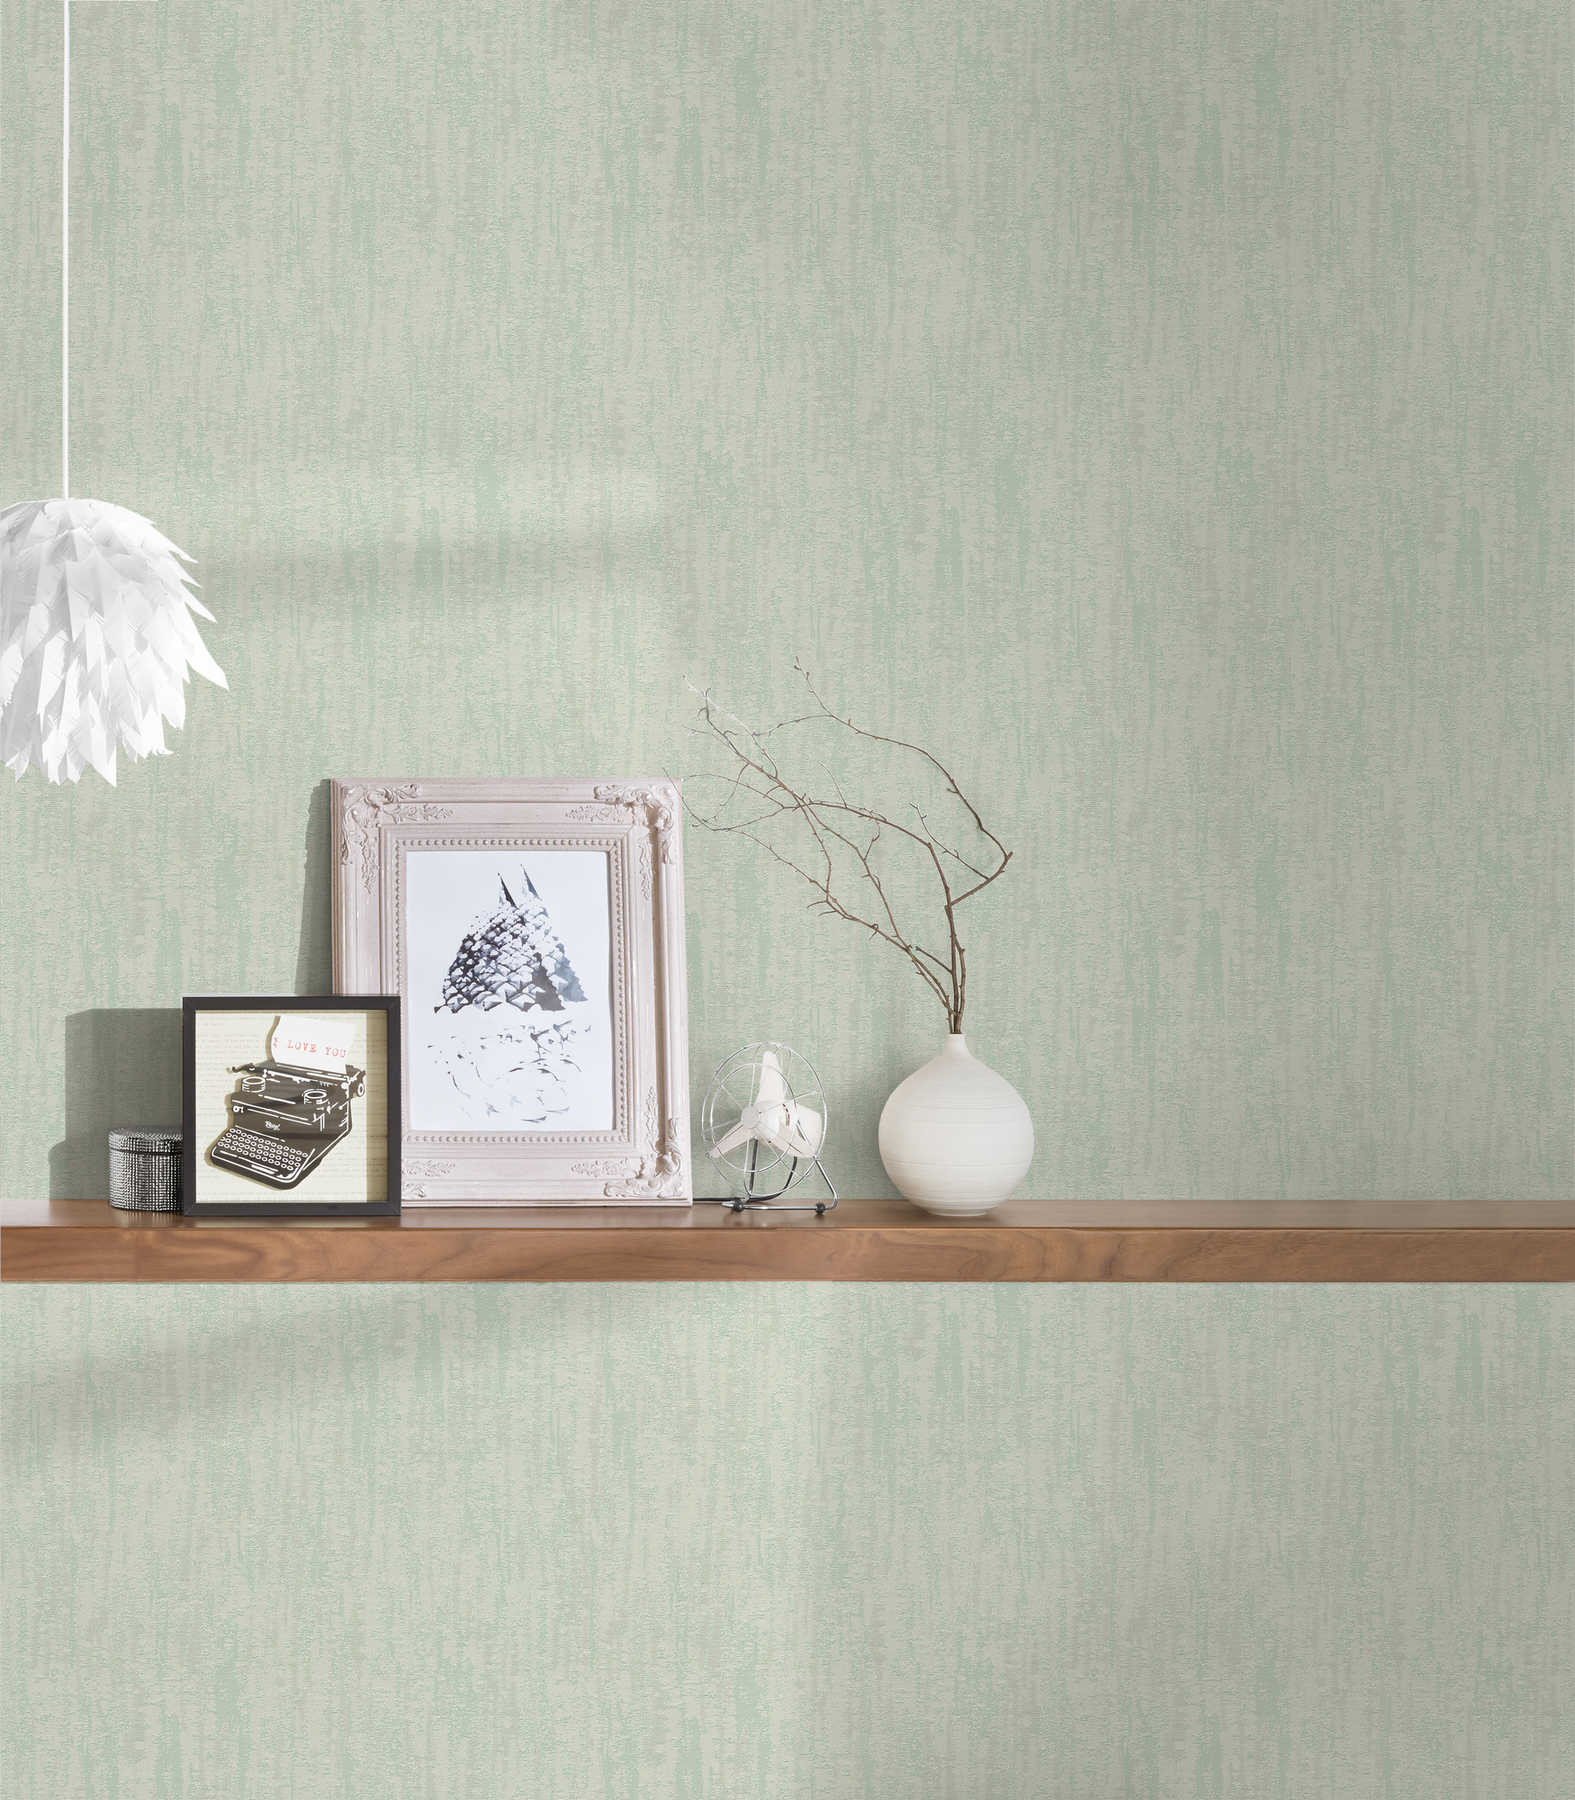             wallpaper mottled with colour hatching & textured pattern - green
        